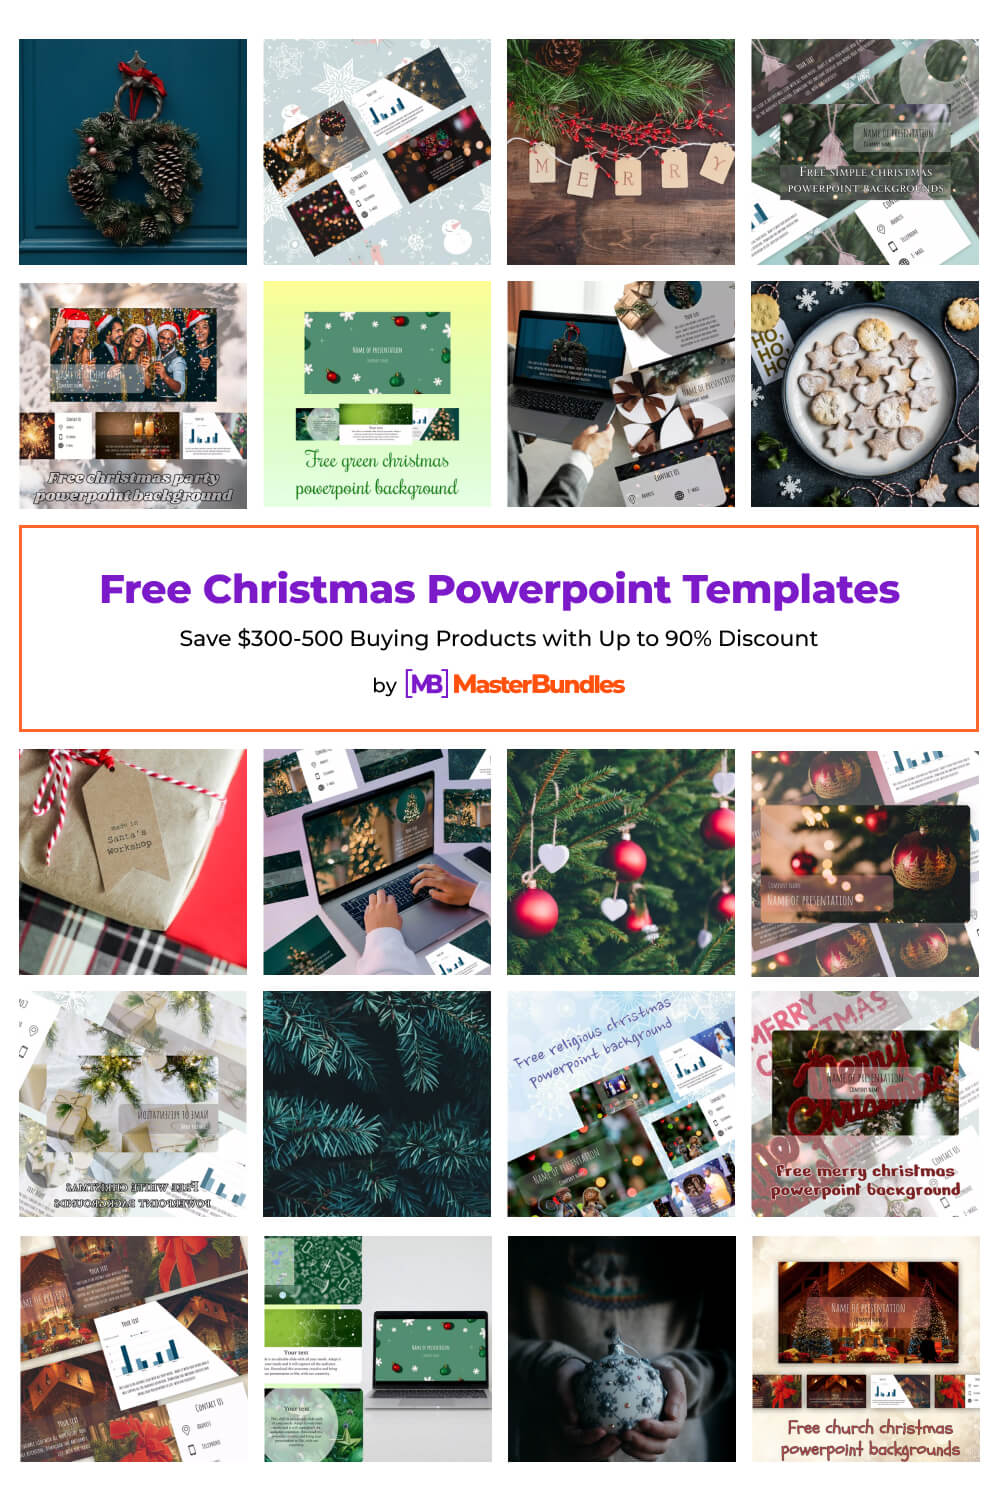 free christmas powerpoint templates pinterest image.